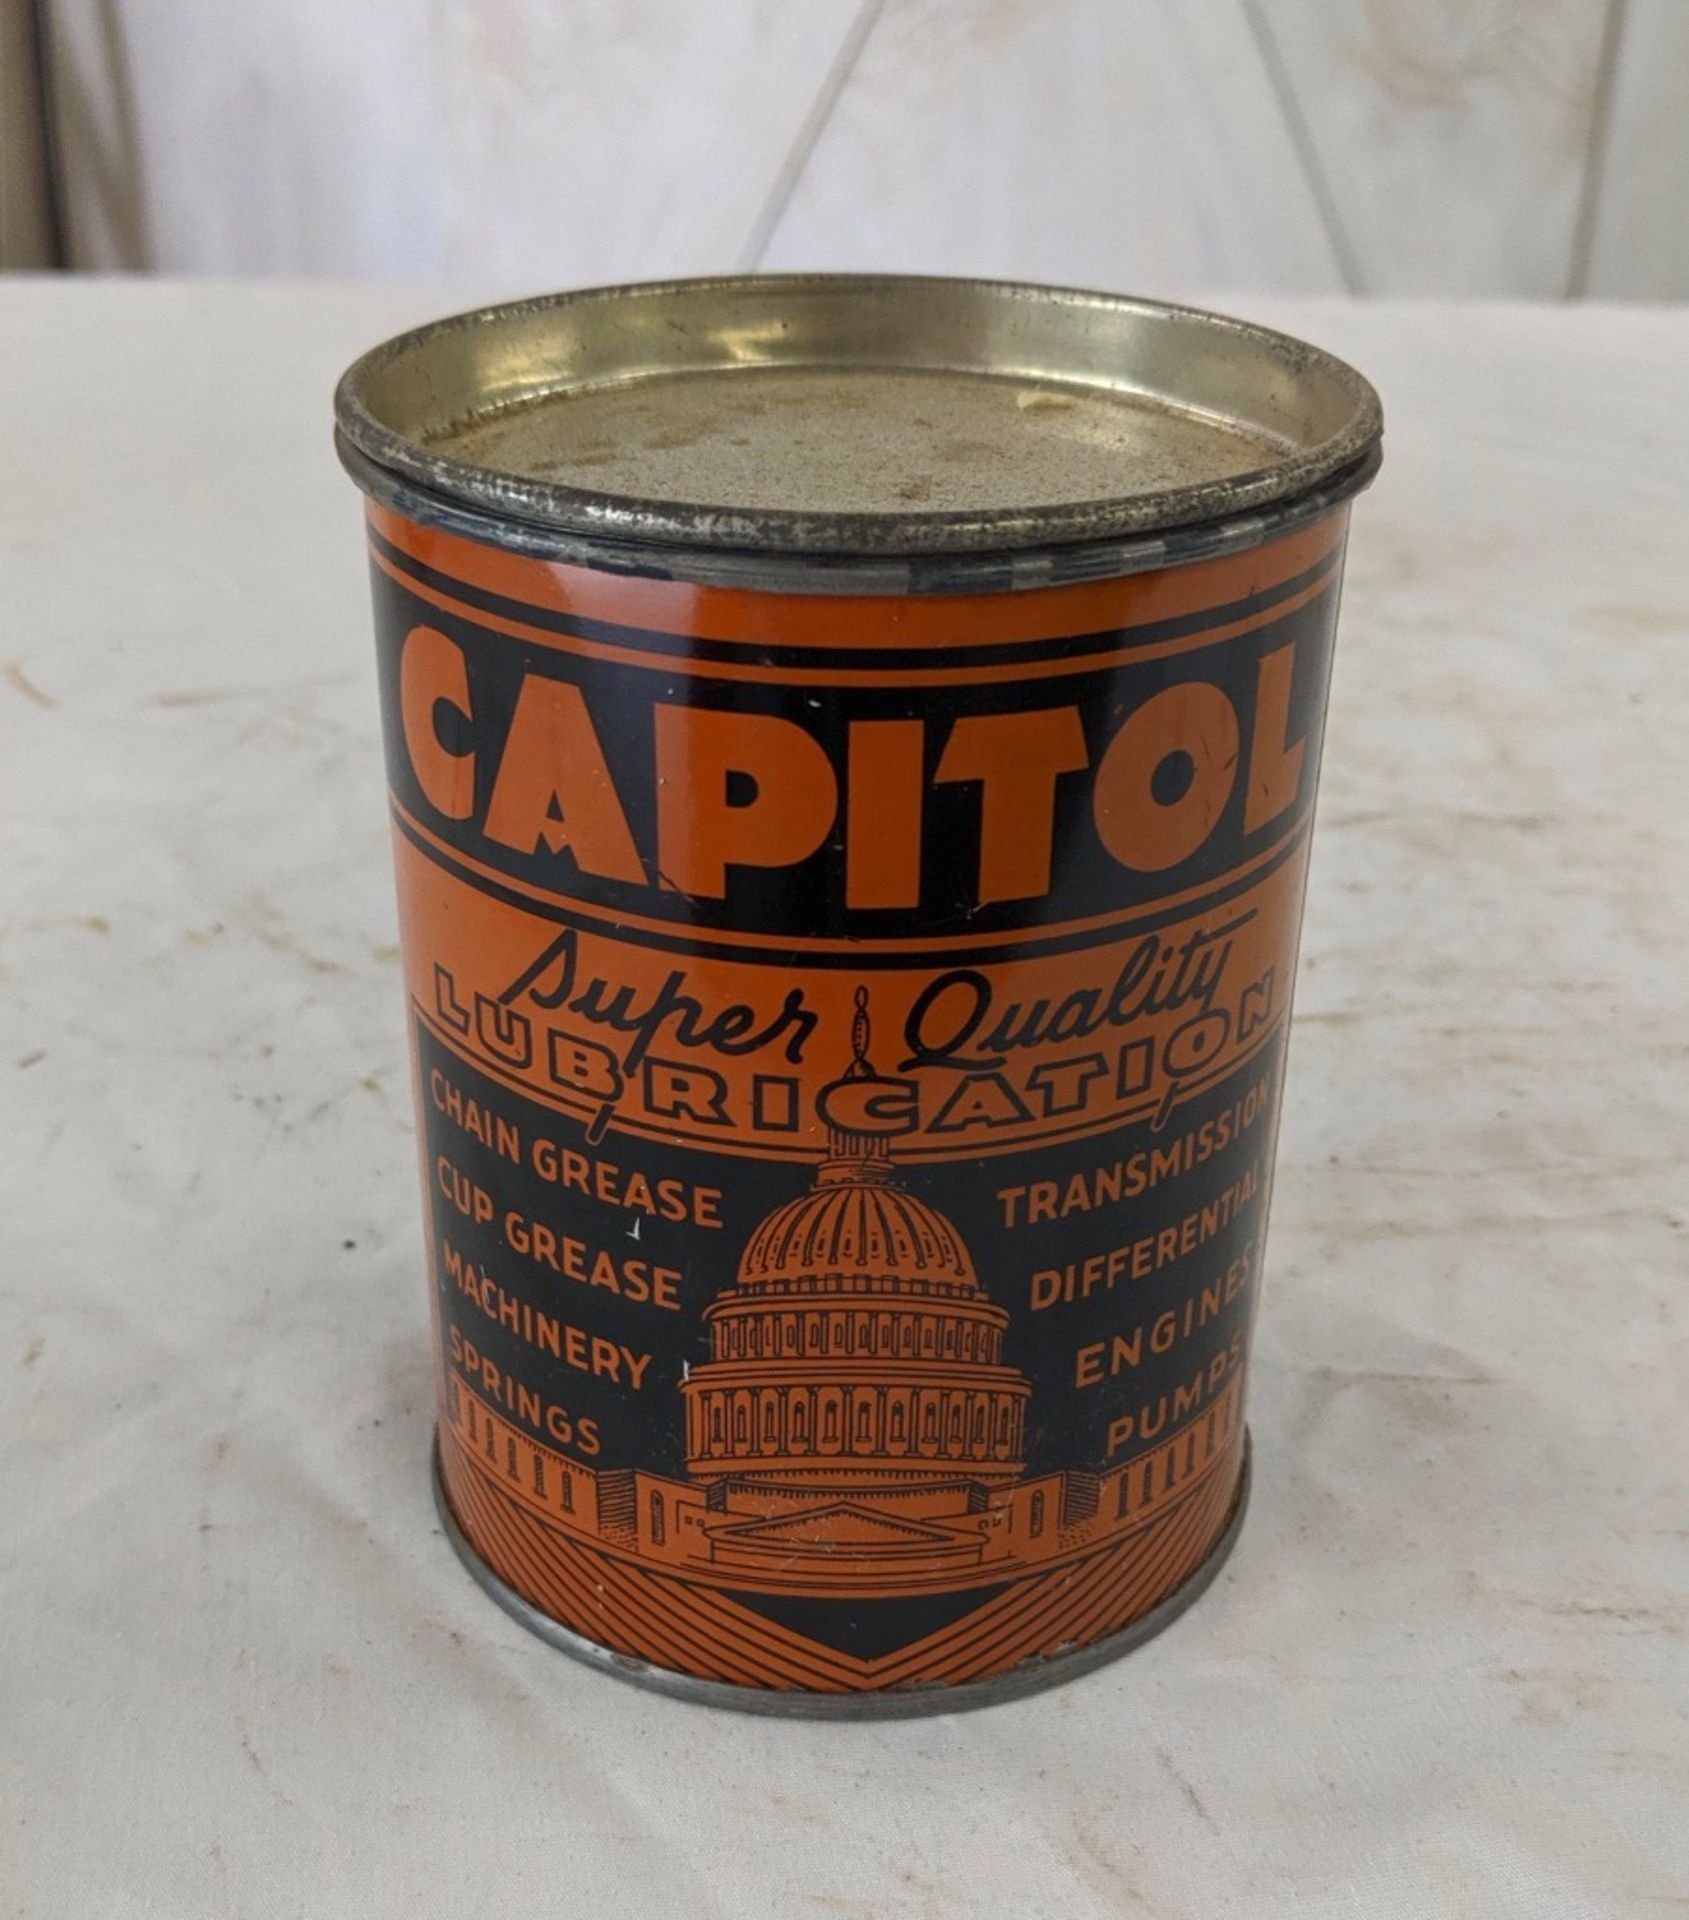 Capital Super Quality Lubrication Grease - 1 Pound Can - Image 2 of 4